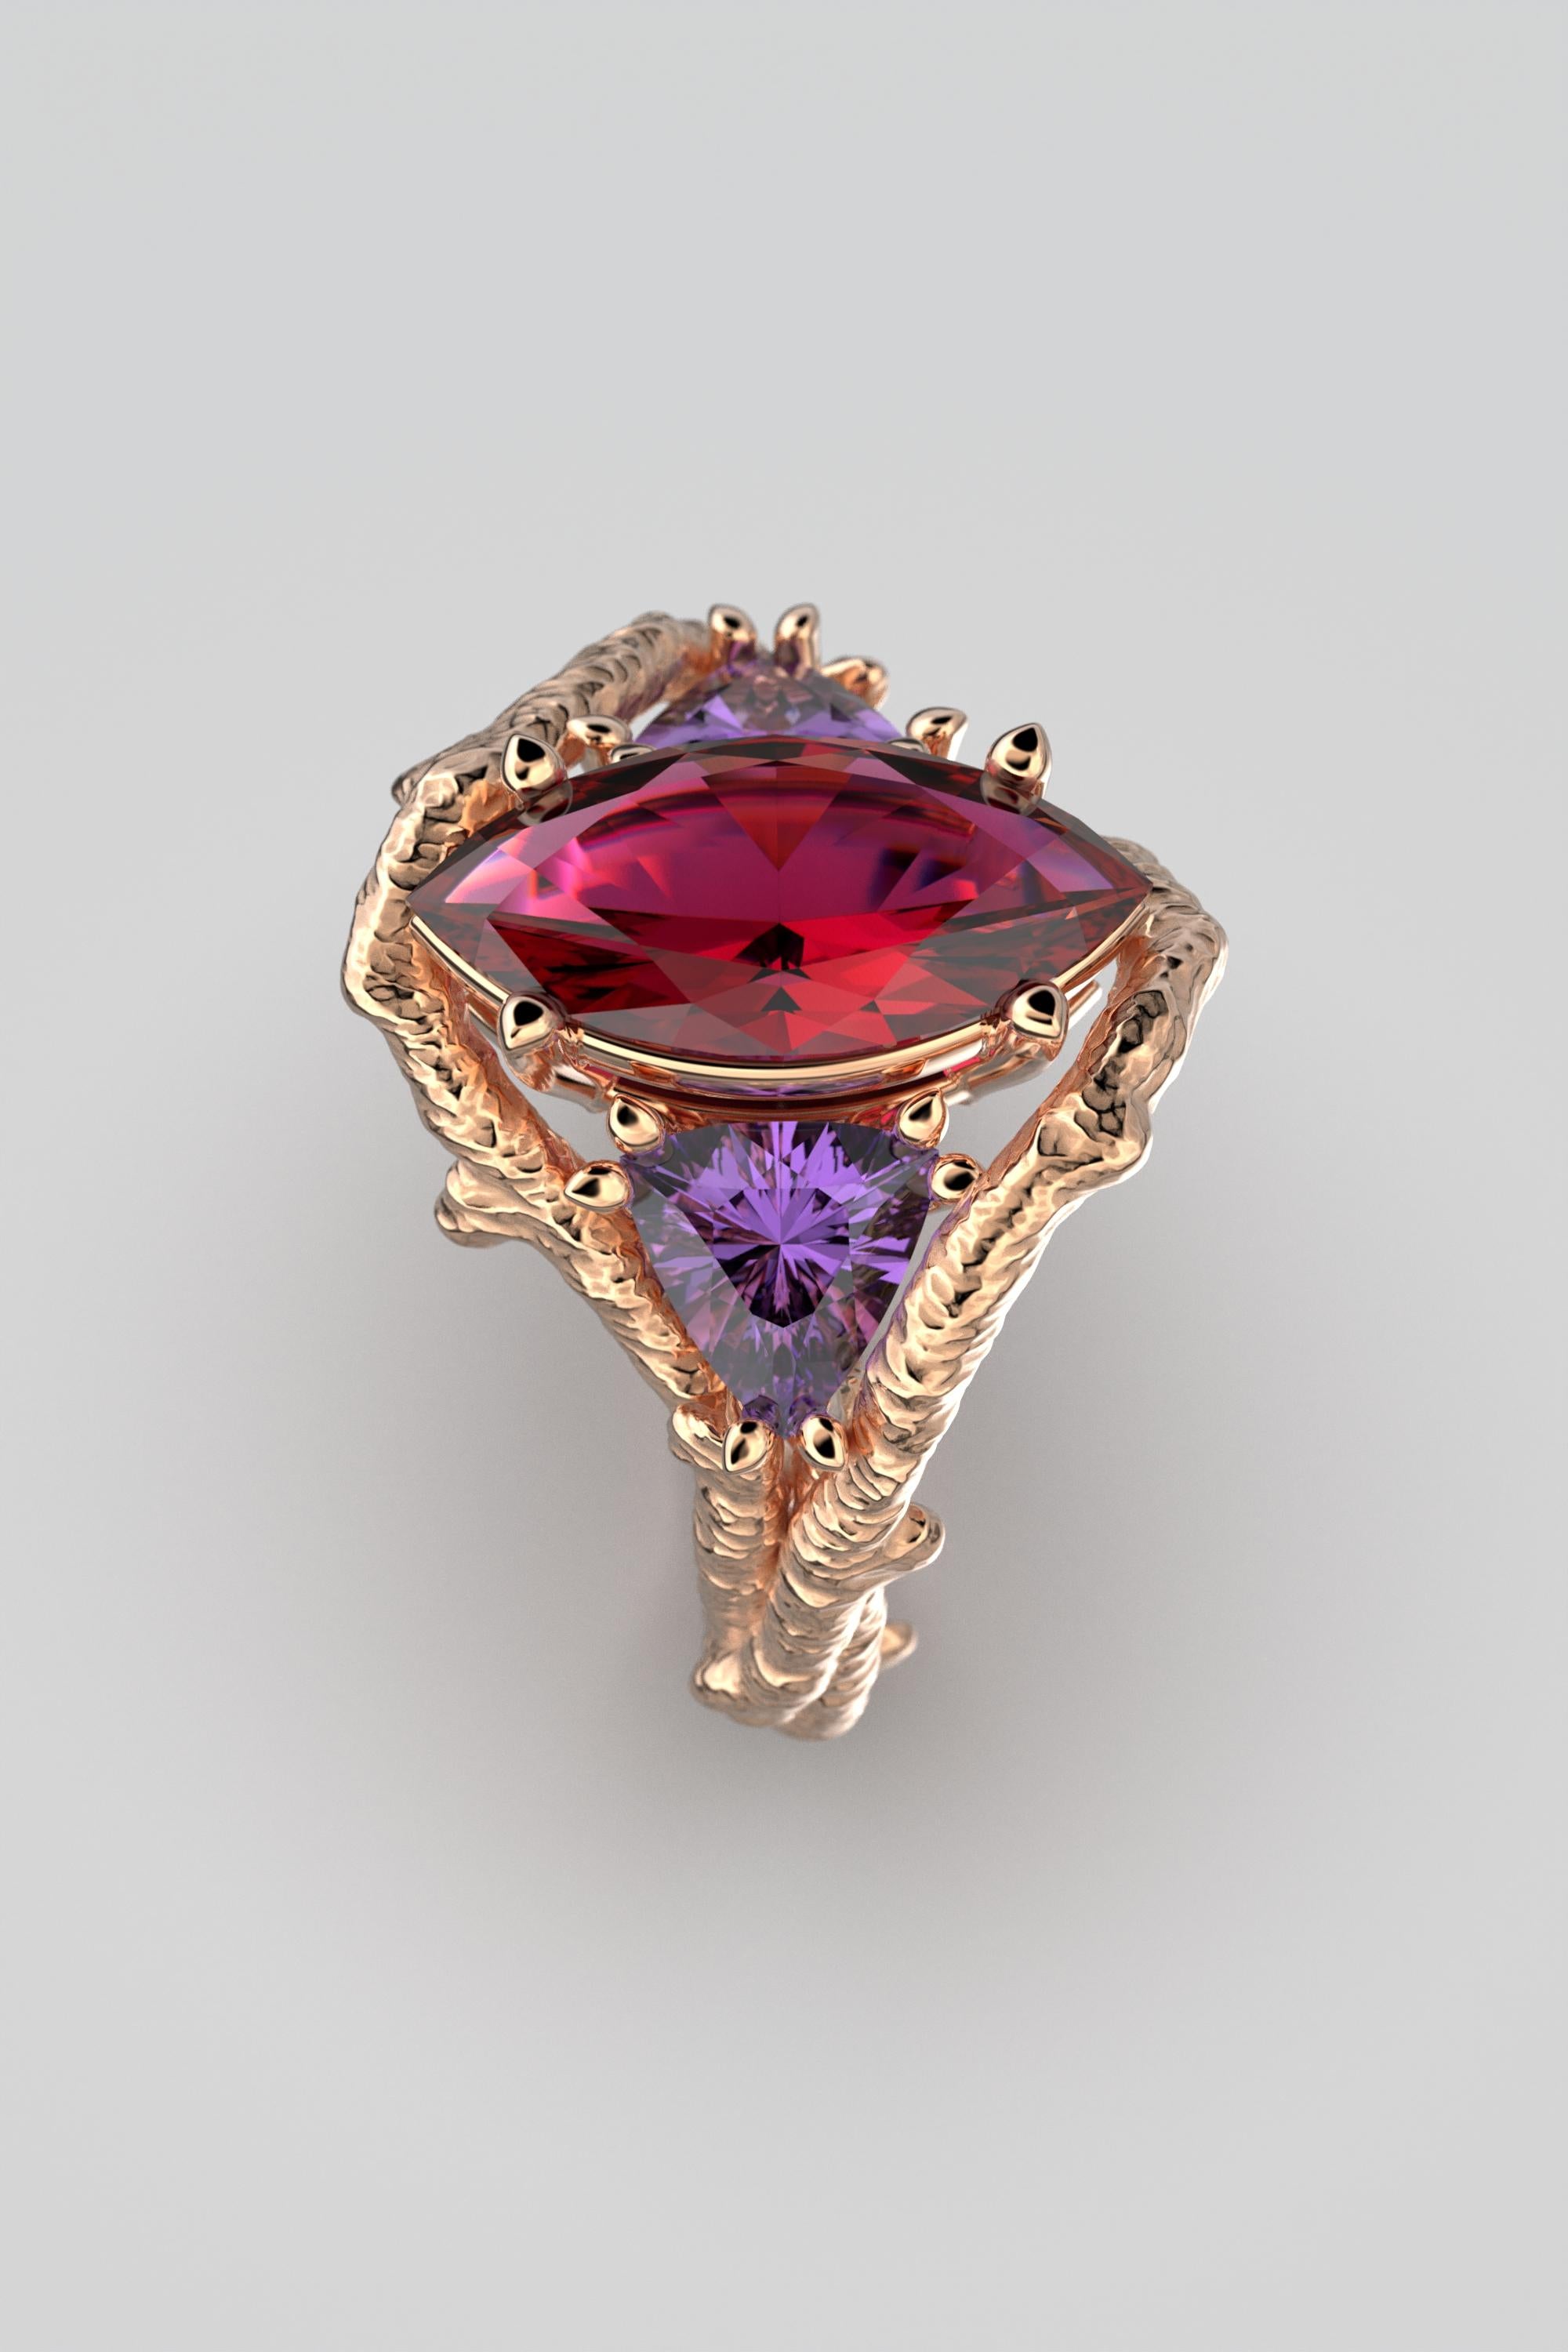 For Sale:  Nature Inspired 18k Solid Gold Gemstone Ring Made in Italy by Oltremare Gioielli 11